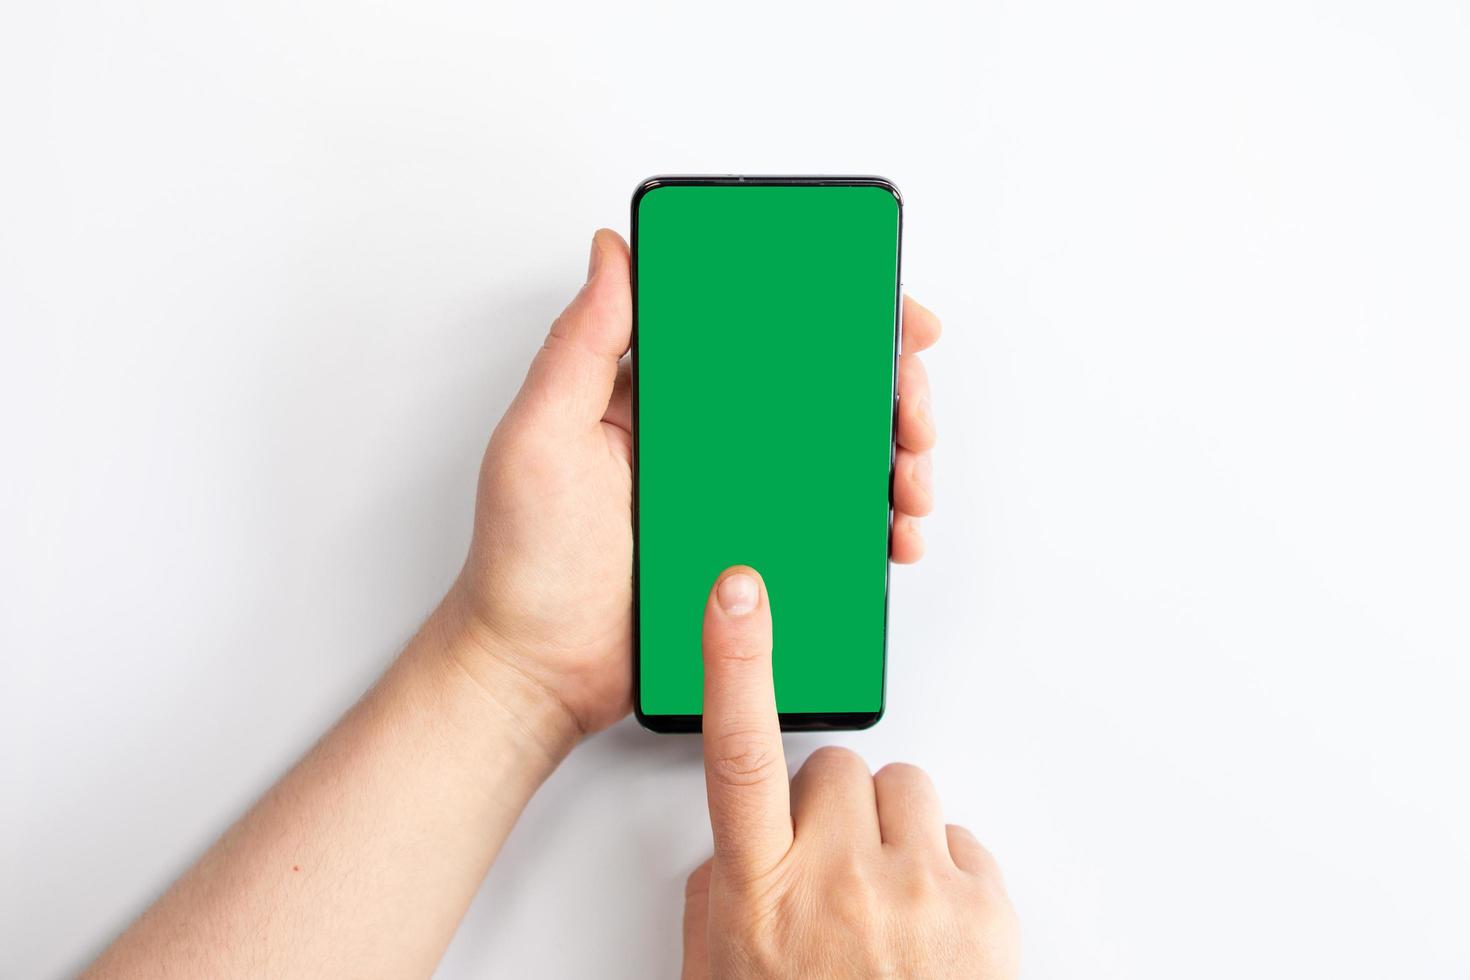 Woman holding a green screen mobile phone with a white background photo